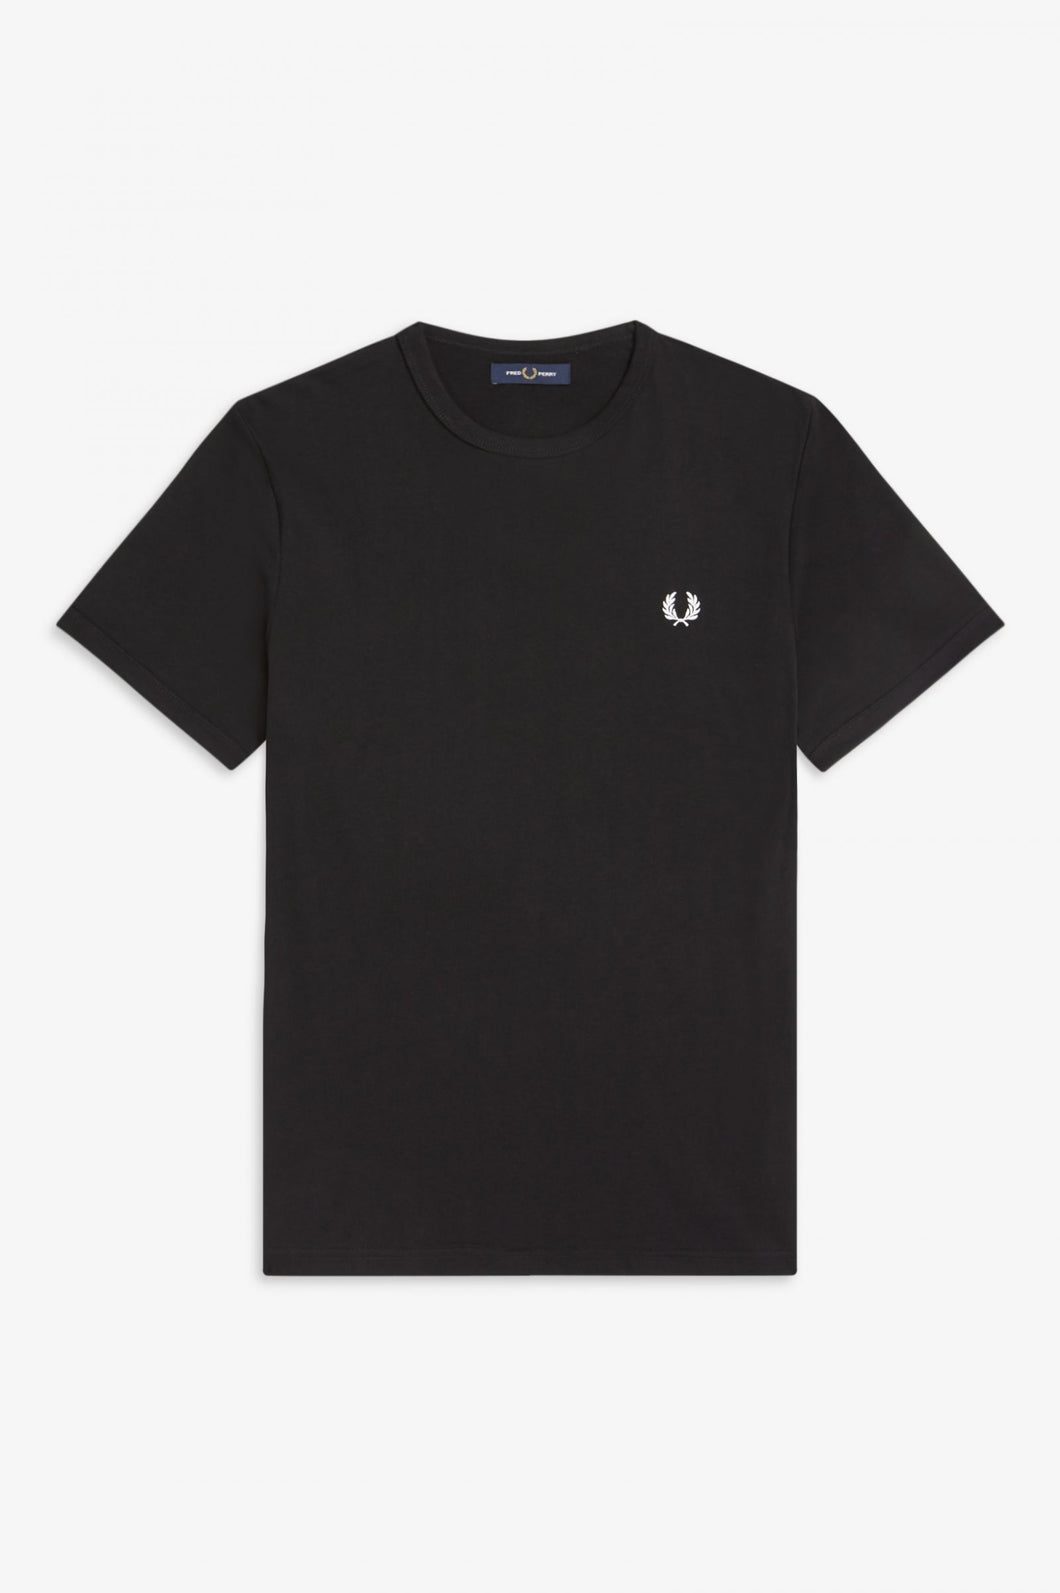 Fred perry Black Ringer t-shirt